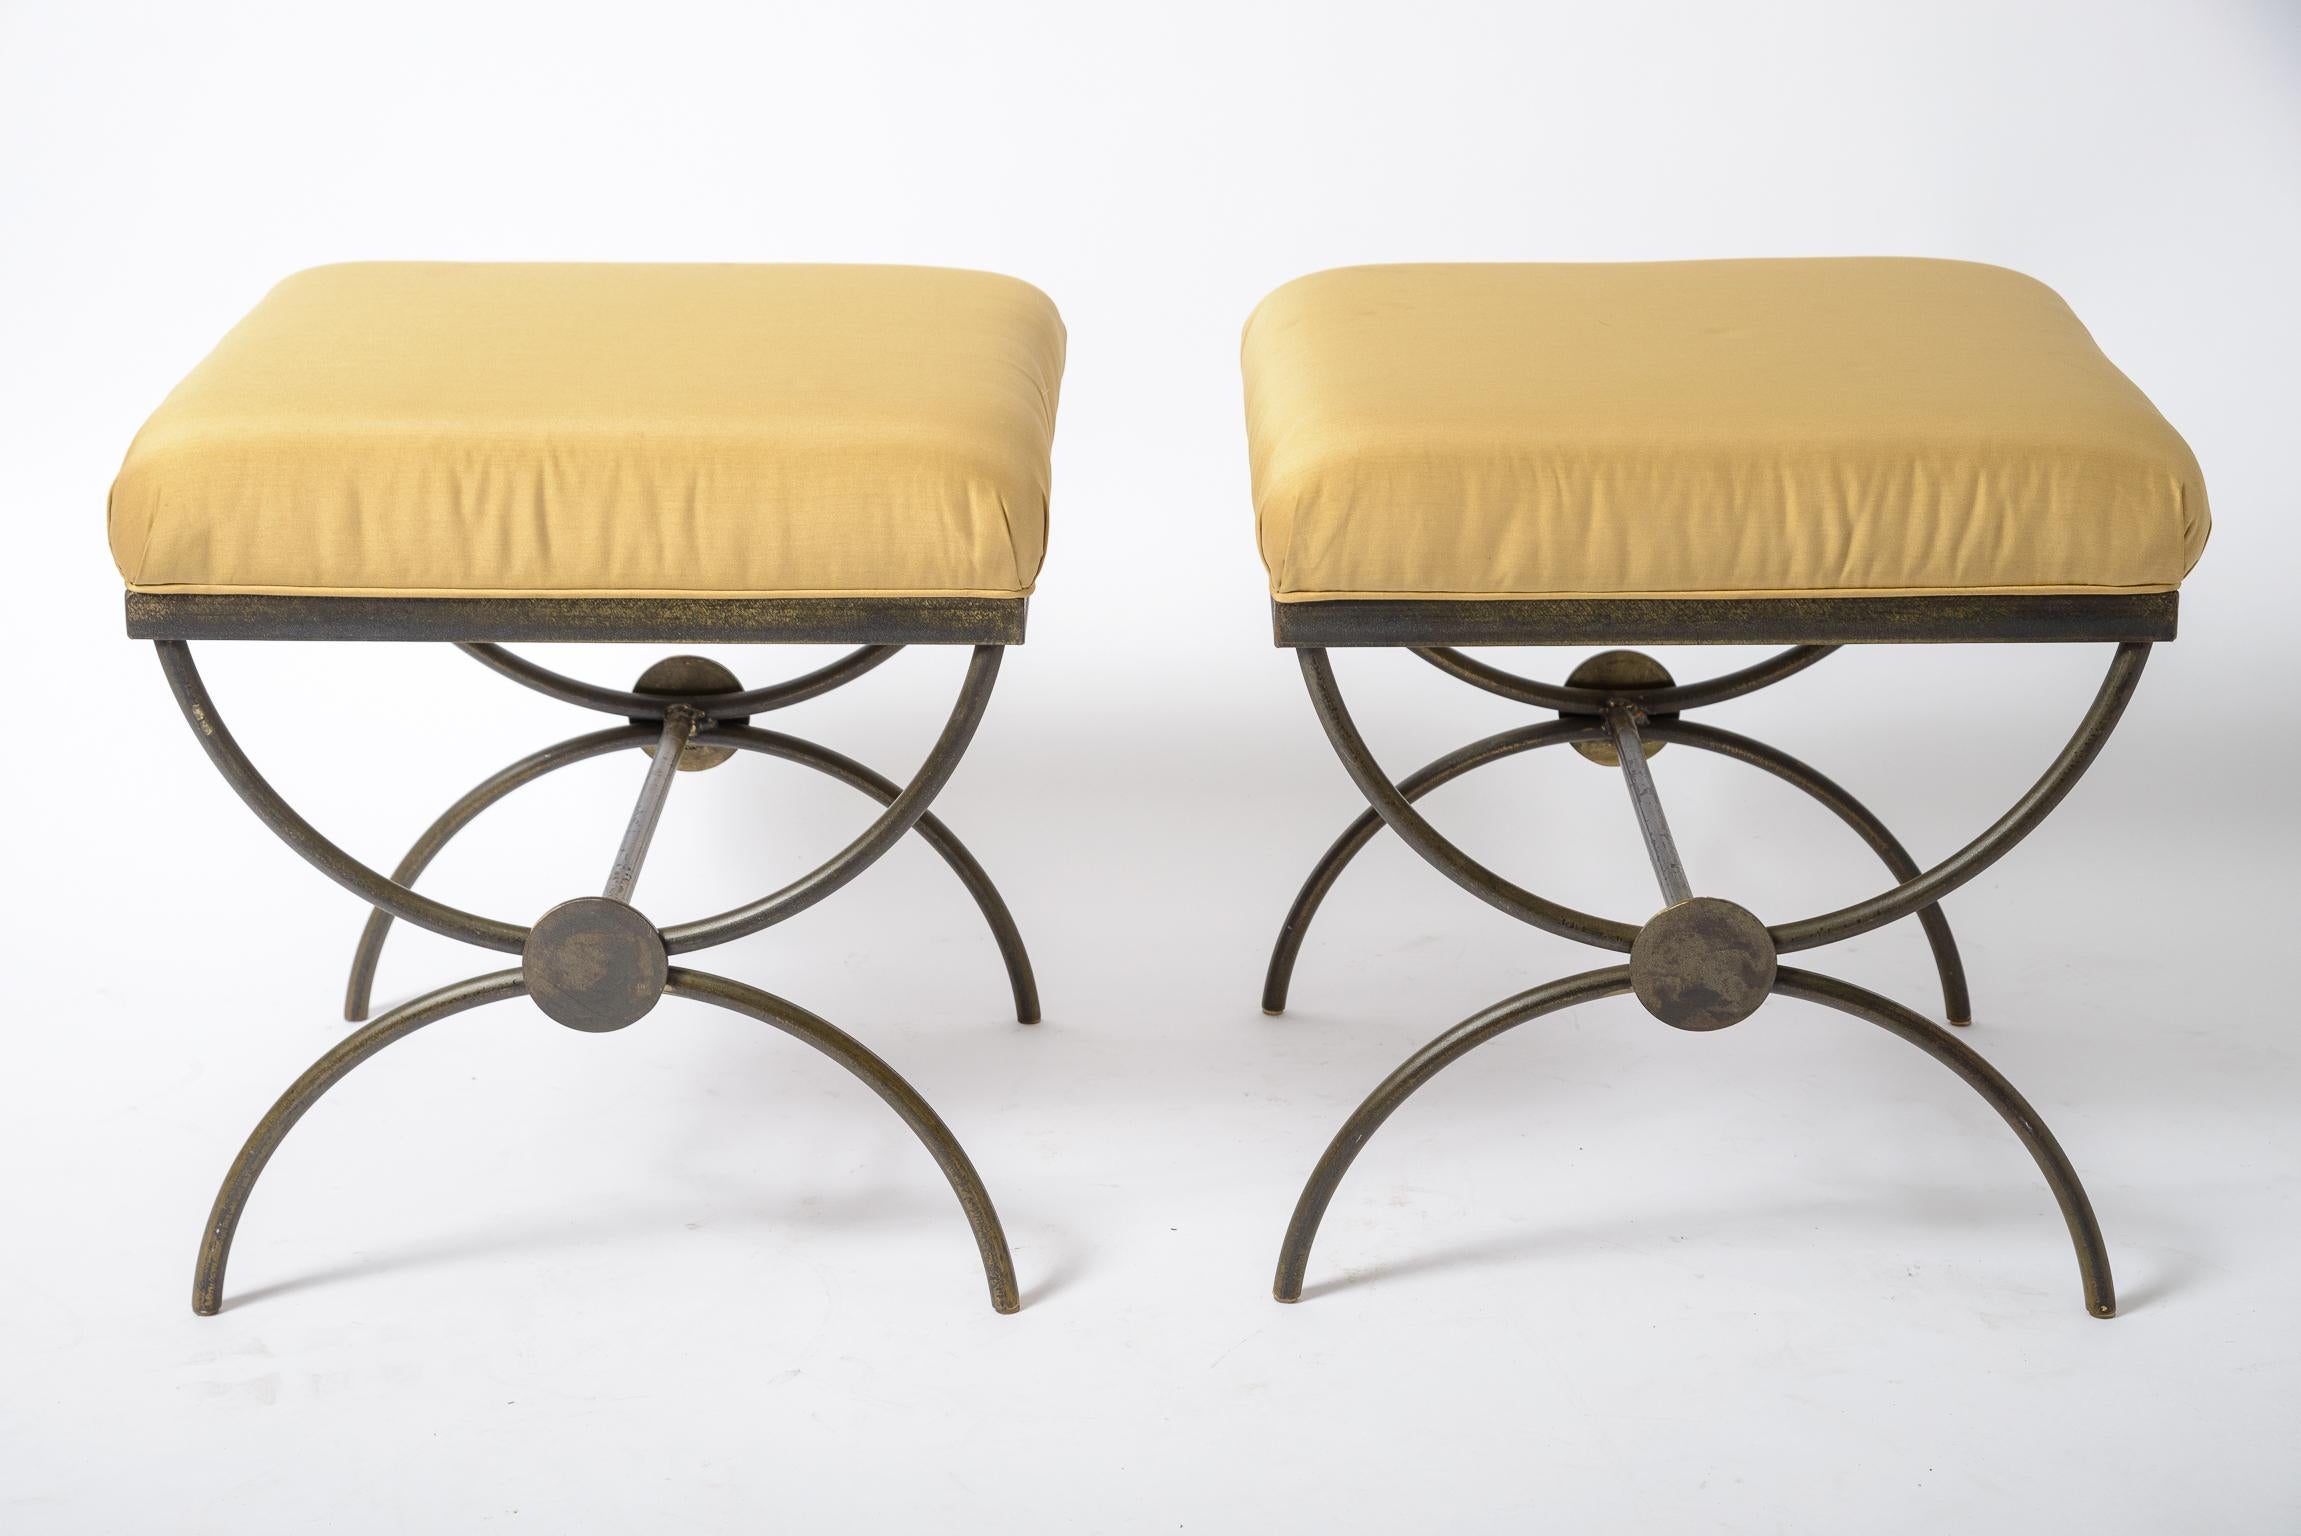 A pair of Swaim Stools
Patinated Steel structure
Original Silk upholstery (minor stains)
Printed company insignia on dust cover